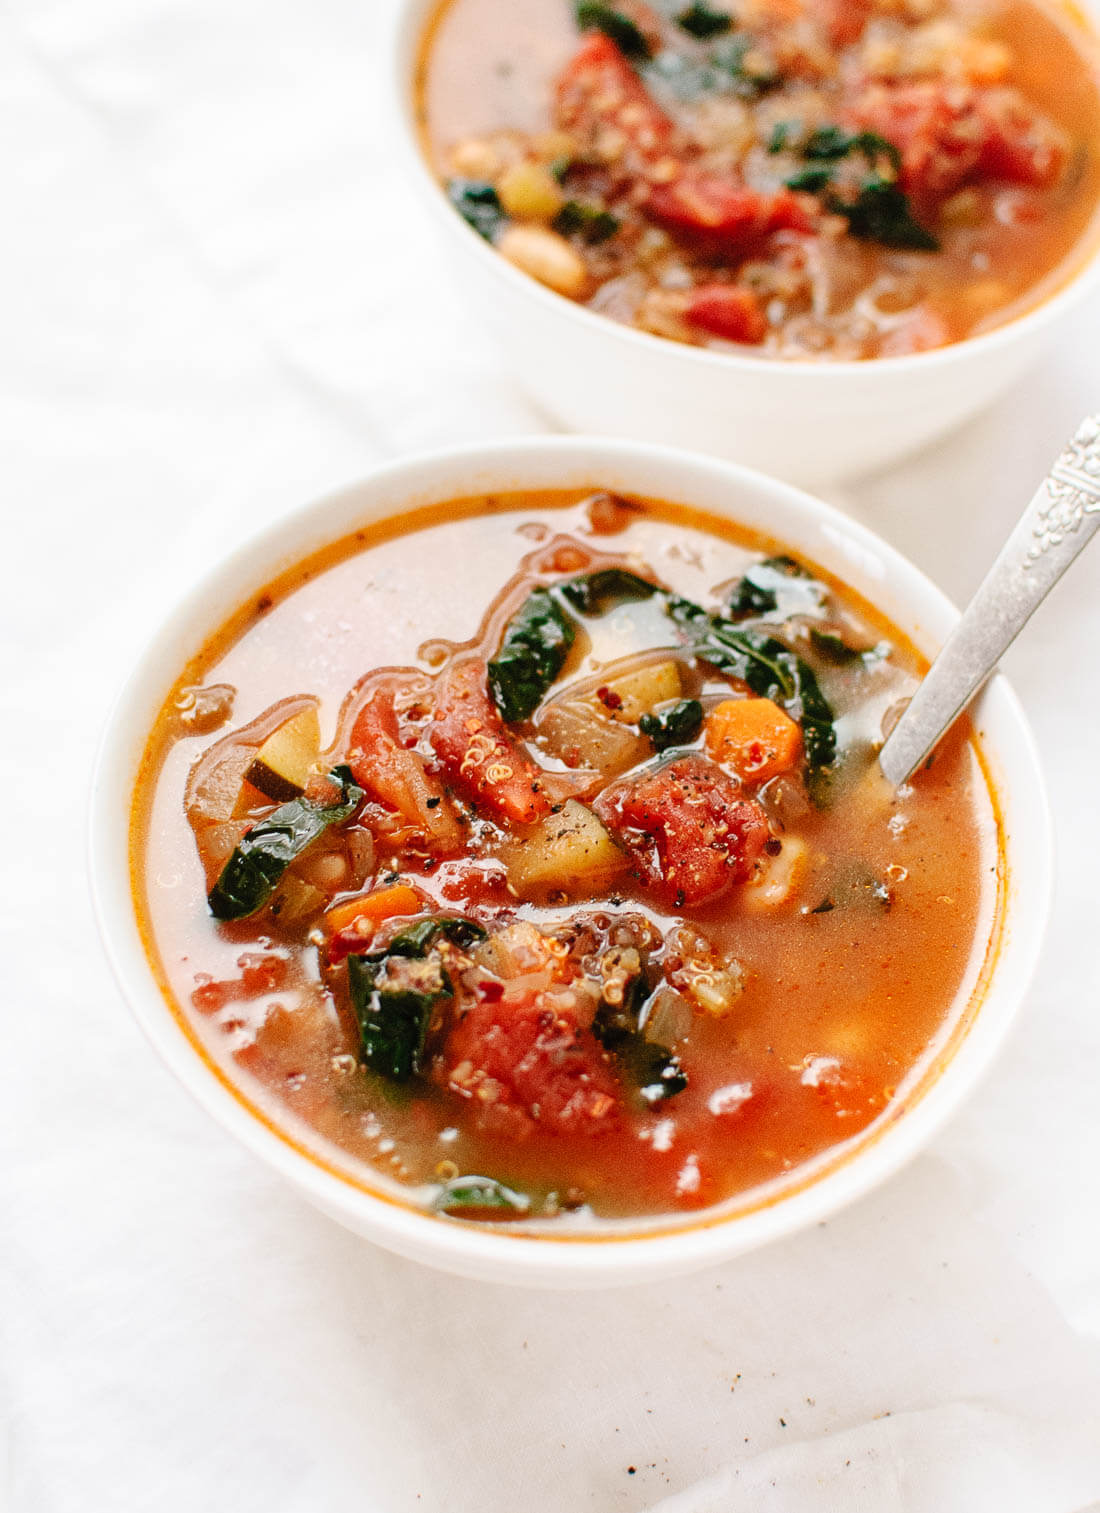 This quinoa vegetable soup makes great leftovers for lunch! It's easy to make and good for you, too. cookieandkate.com